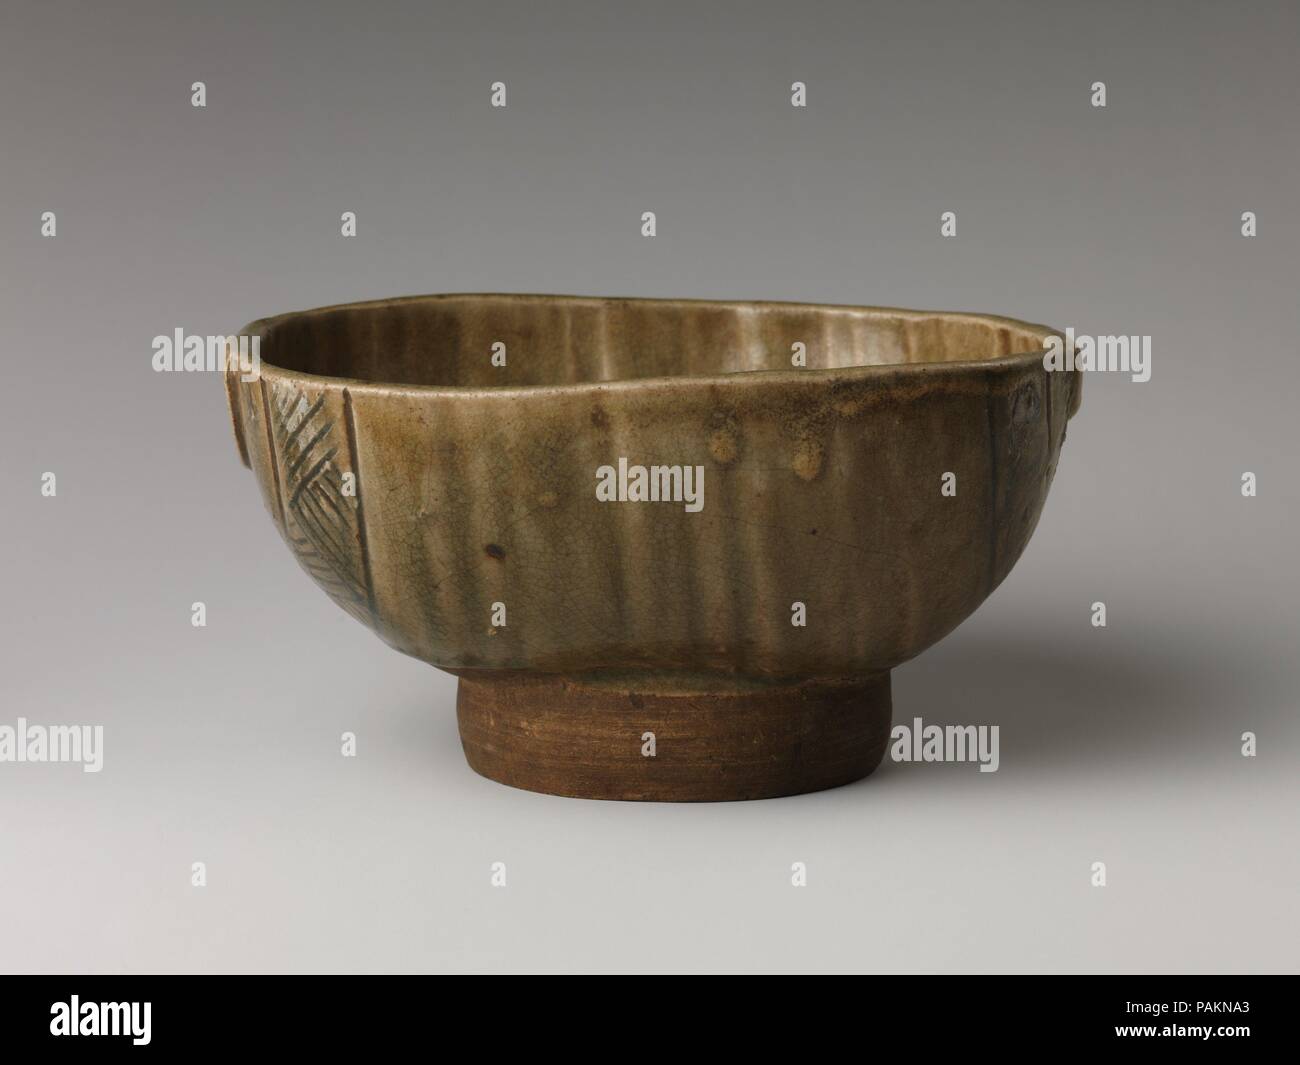 Deep Bowl. Artist: Shuntai (Japanese, 1799-1878). Culture: Japan. Dimensions: H. 4 in. (10.2 cm); Diam. 5 1/2 in. (14 cm). Date: 19th century.  Kato Shuntai, whose father was the famous potter Shunzan, ran the official Owari branch of the Tokugawa family kiln (goyoyama) at Ofukeyo from 1817until 1851, when he passed the operations on to his son. He is famous for his Oribe style renditions. Museum: Metropolitan Museum of Art, New York, USA. Stock Photo